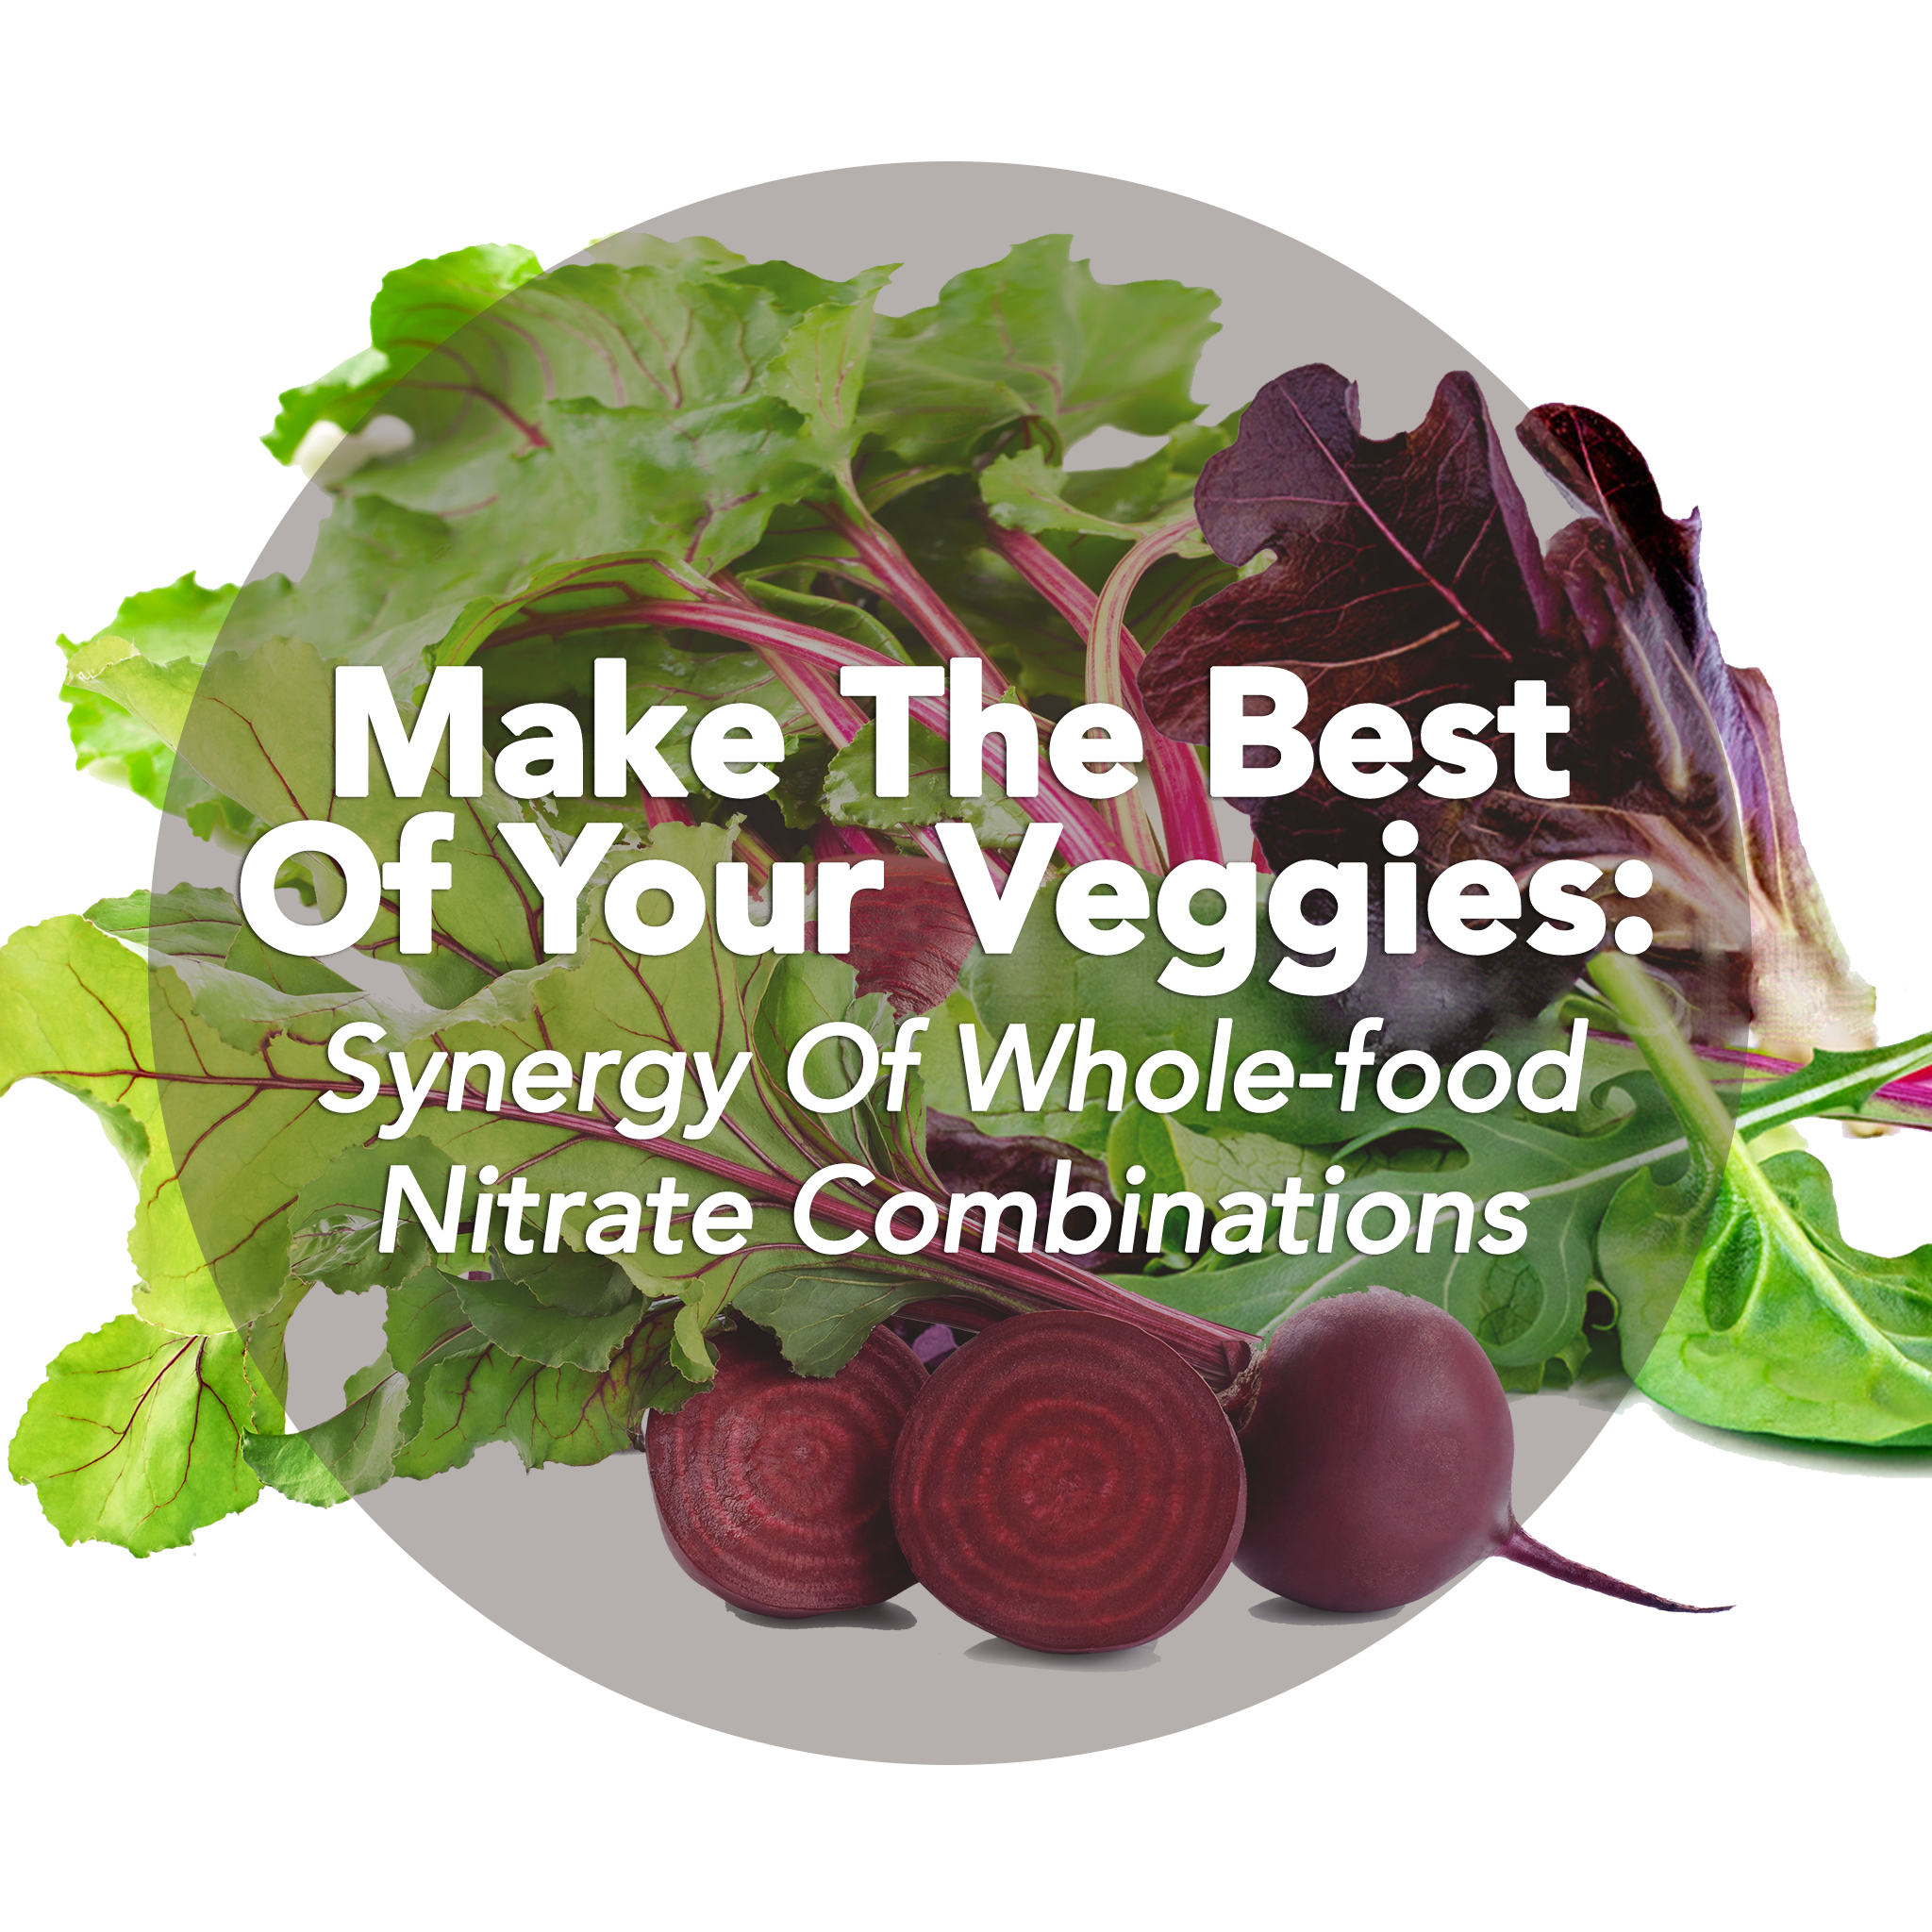 Make The Best Of Your Veggies: Synergy Of Whole-food Nitrate Combinations